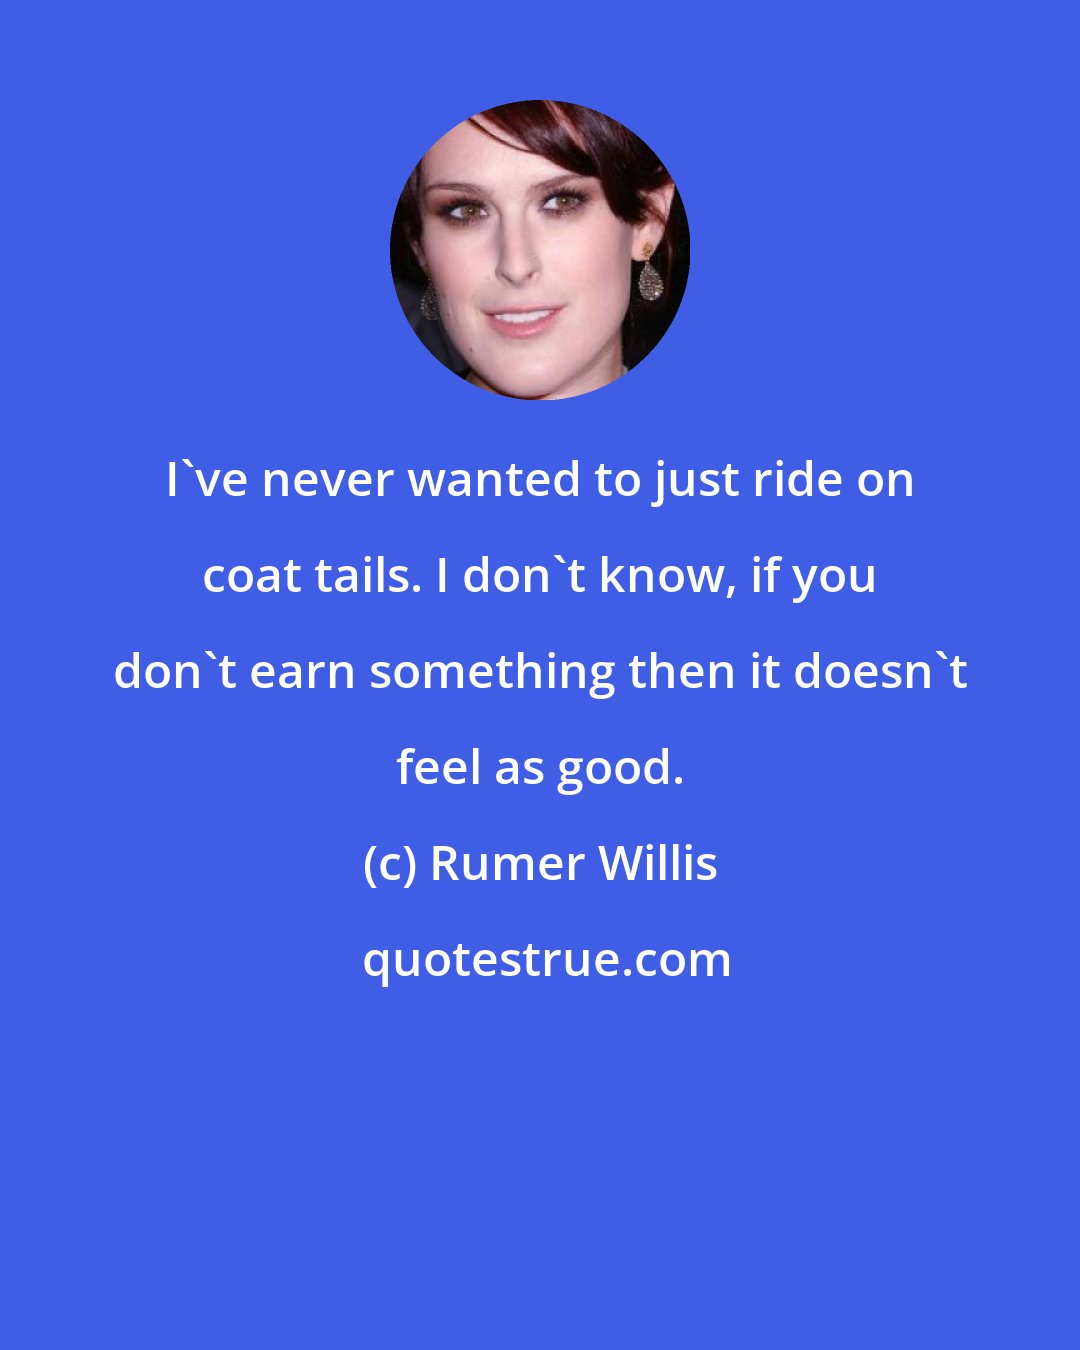 Rumer Willis: I've never wanted to just ride on coat tails. I don't know, if you don't earn something then it doesn't feel as good.